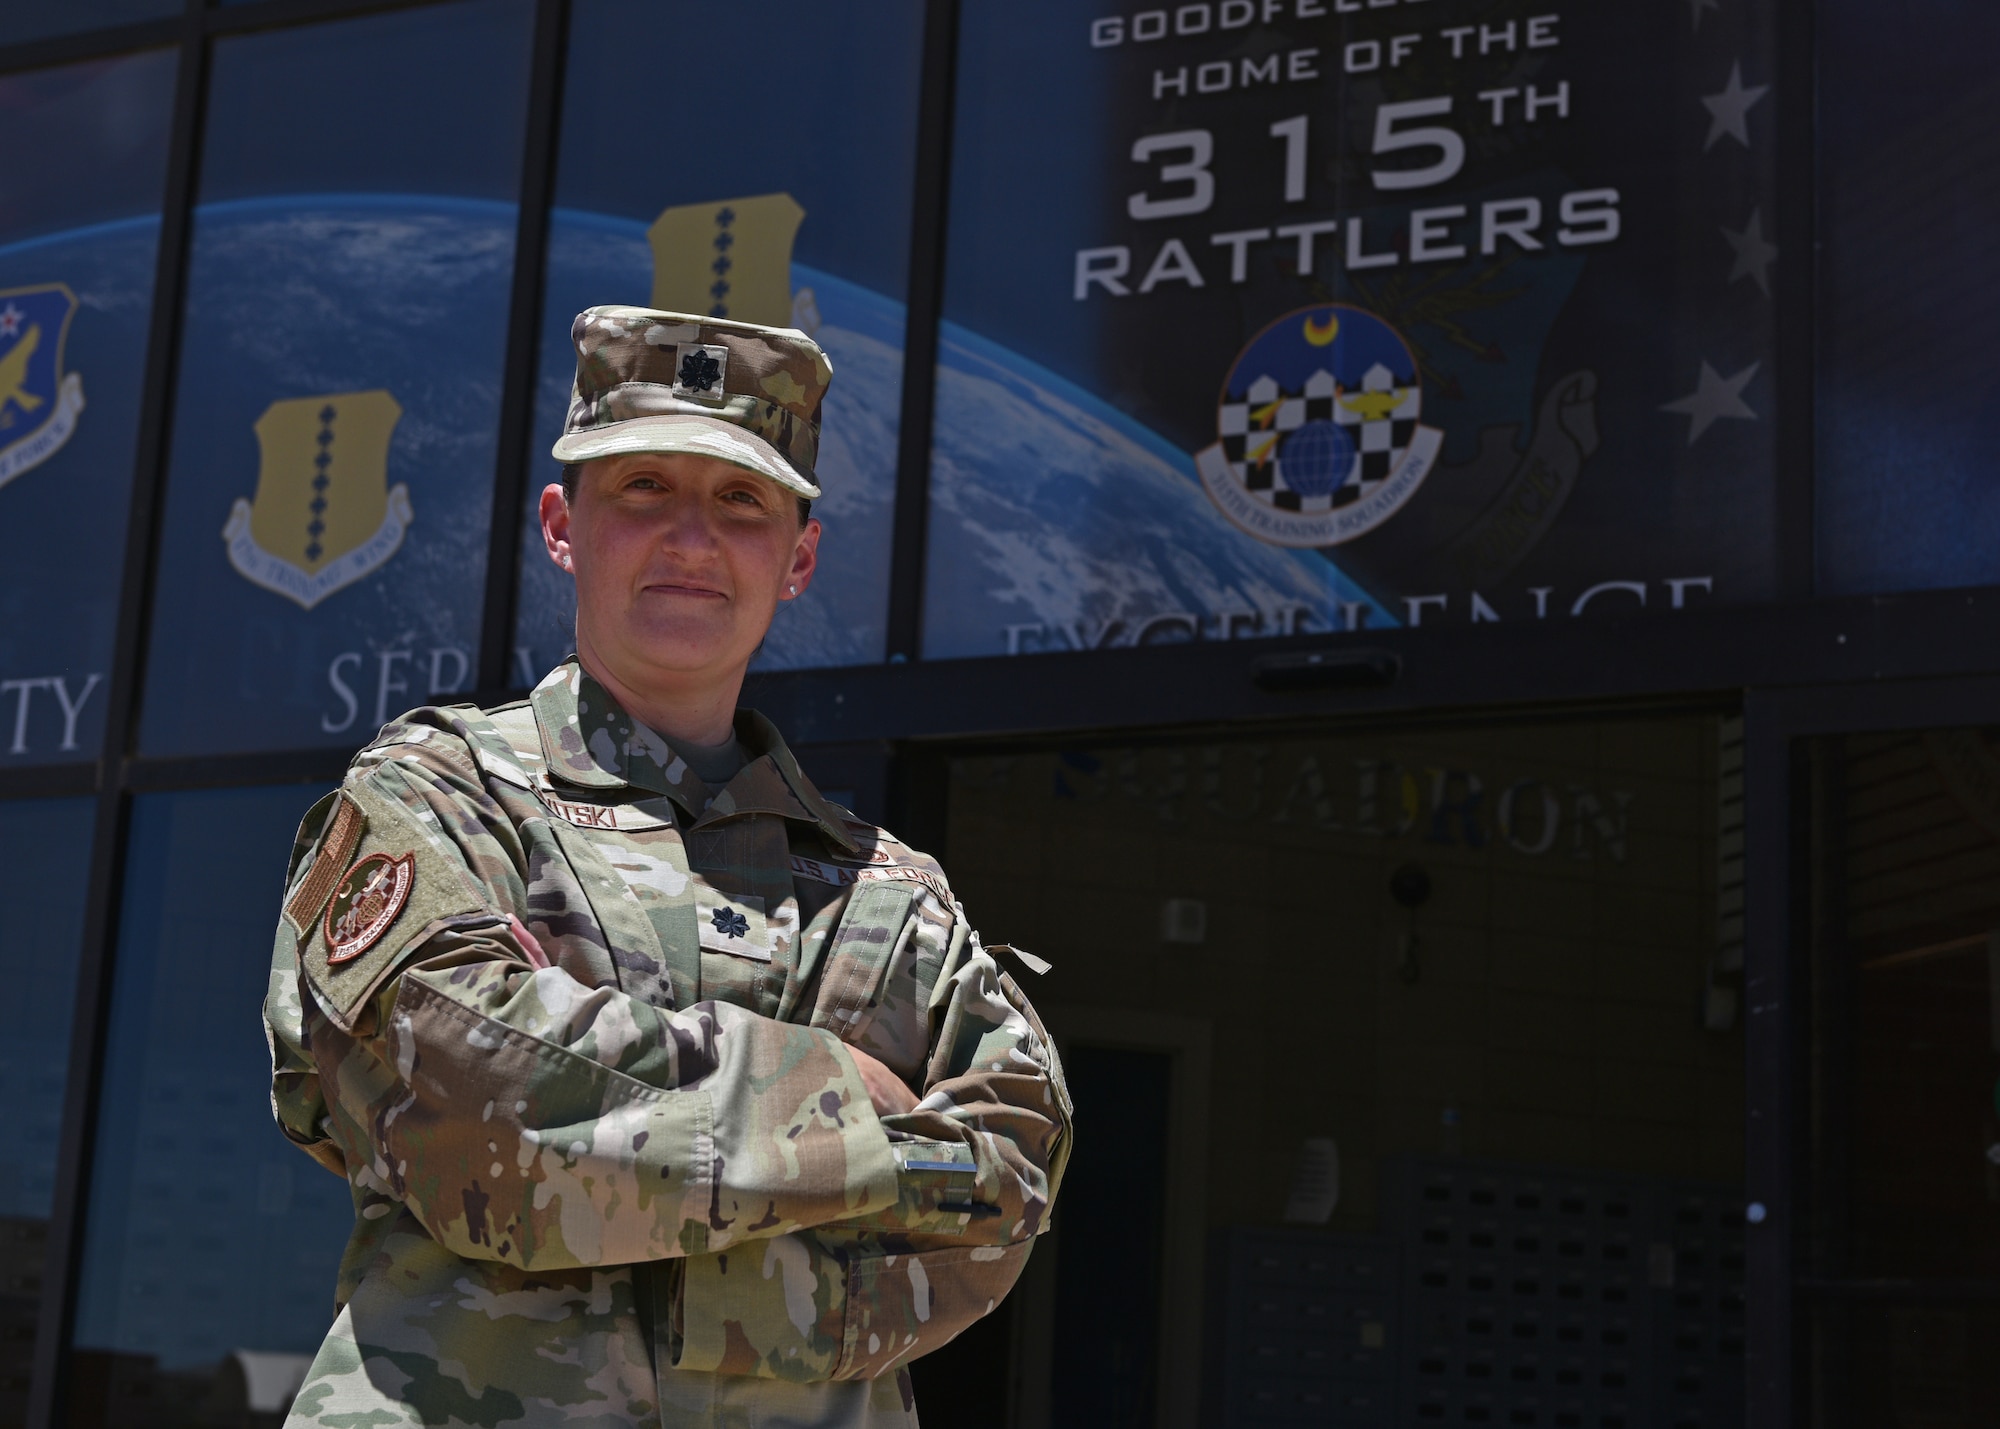 U.S. Air Force Lt. Col. Liane Zivitski, 315th Training Squadron commander, poses for a photo in front of the 315th TRS building at Goodfellow Air Force Base, Texas, July 25, 2022. Zivitski took command of the 315th TRS on June 10. (U.S. Air Force photo by Senior Airman Ashley Thrash)